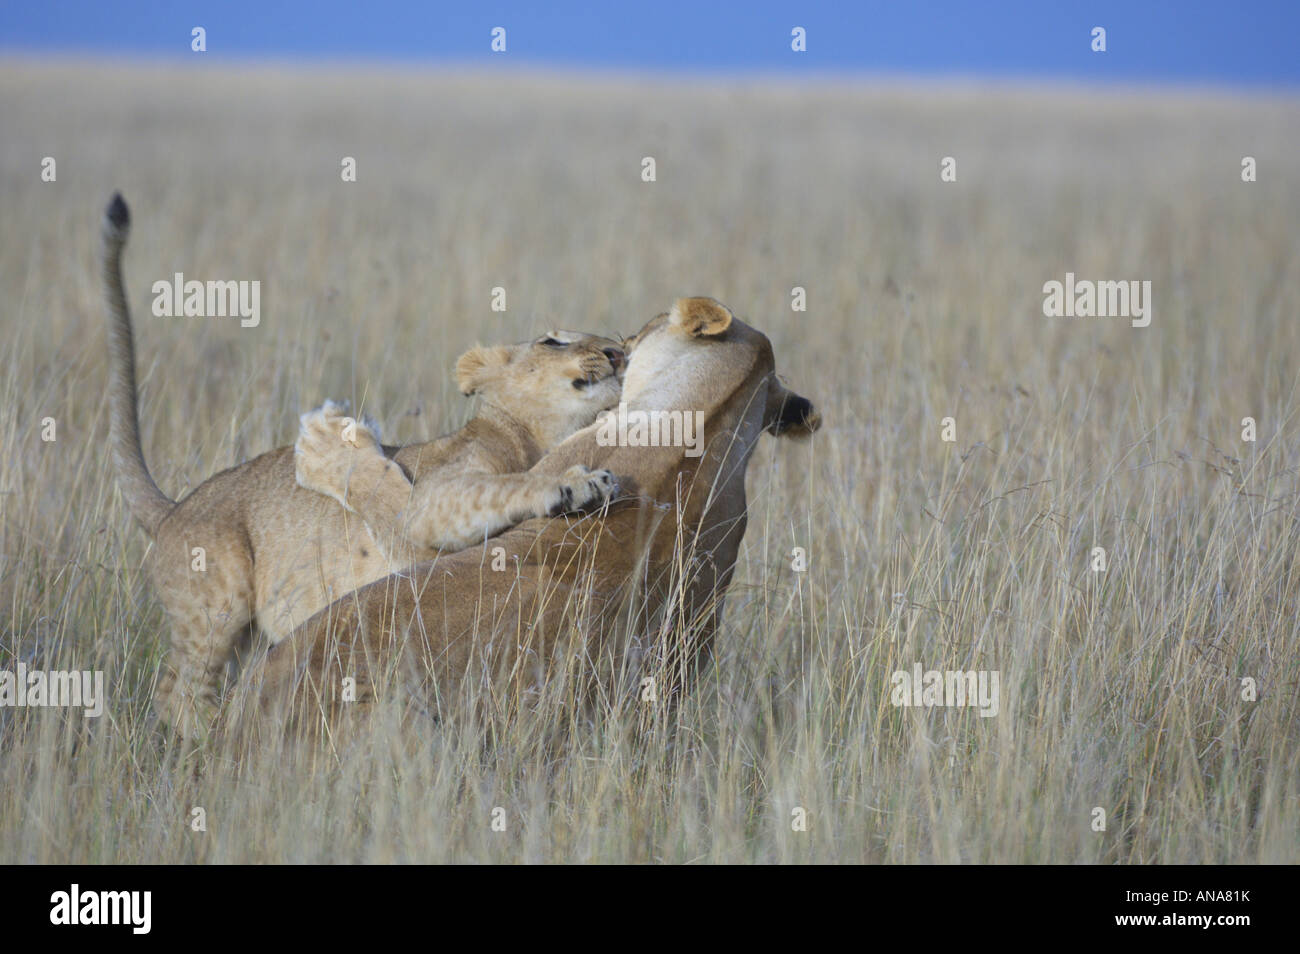 Two lions playing (Panthera leo) in an open grassland Stock Photo